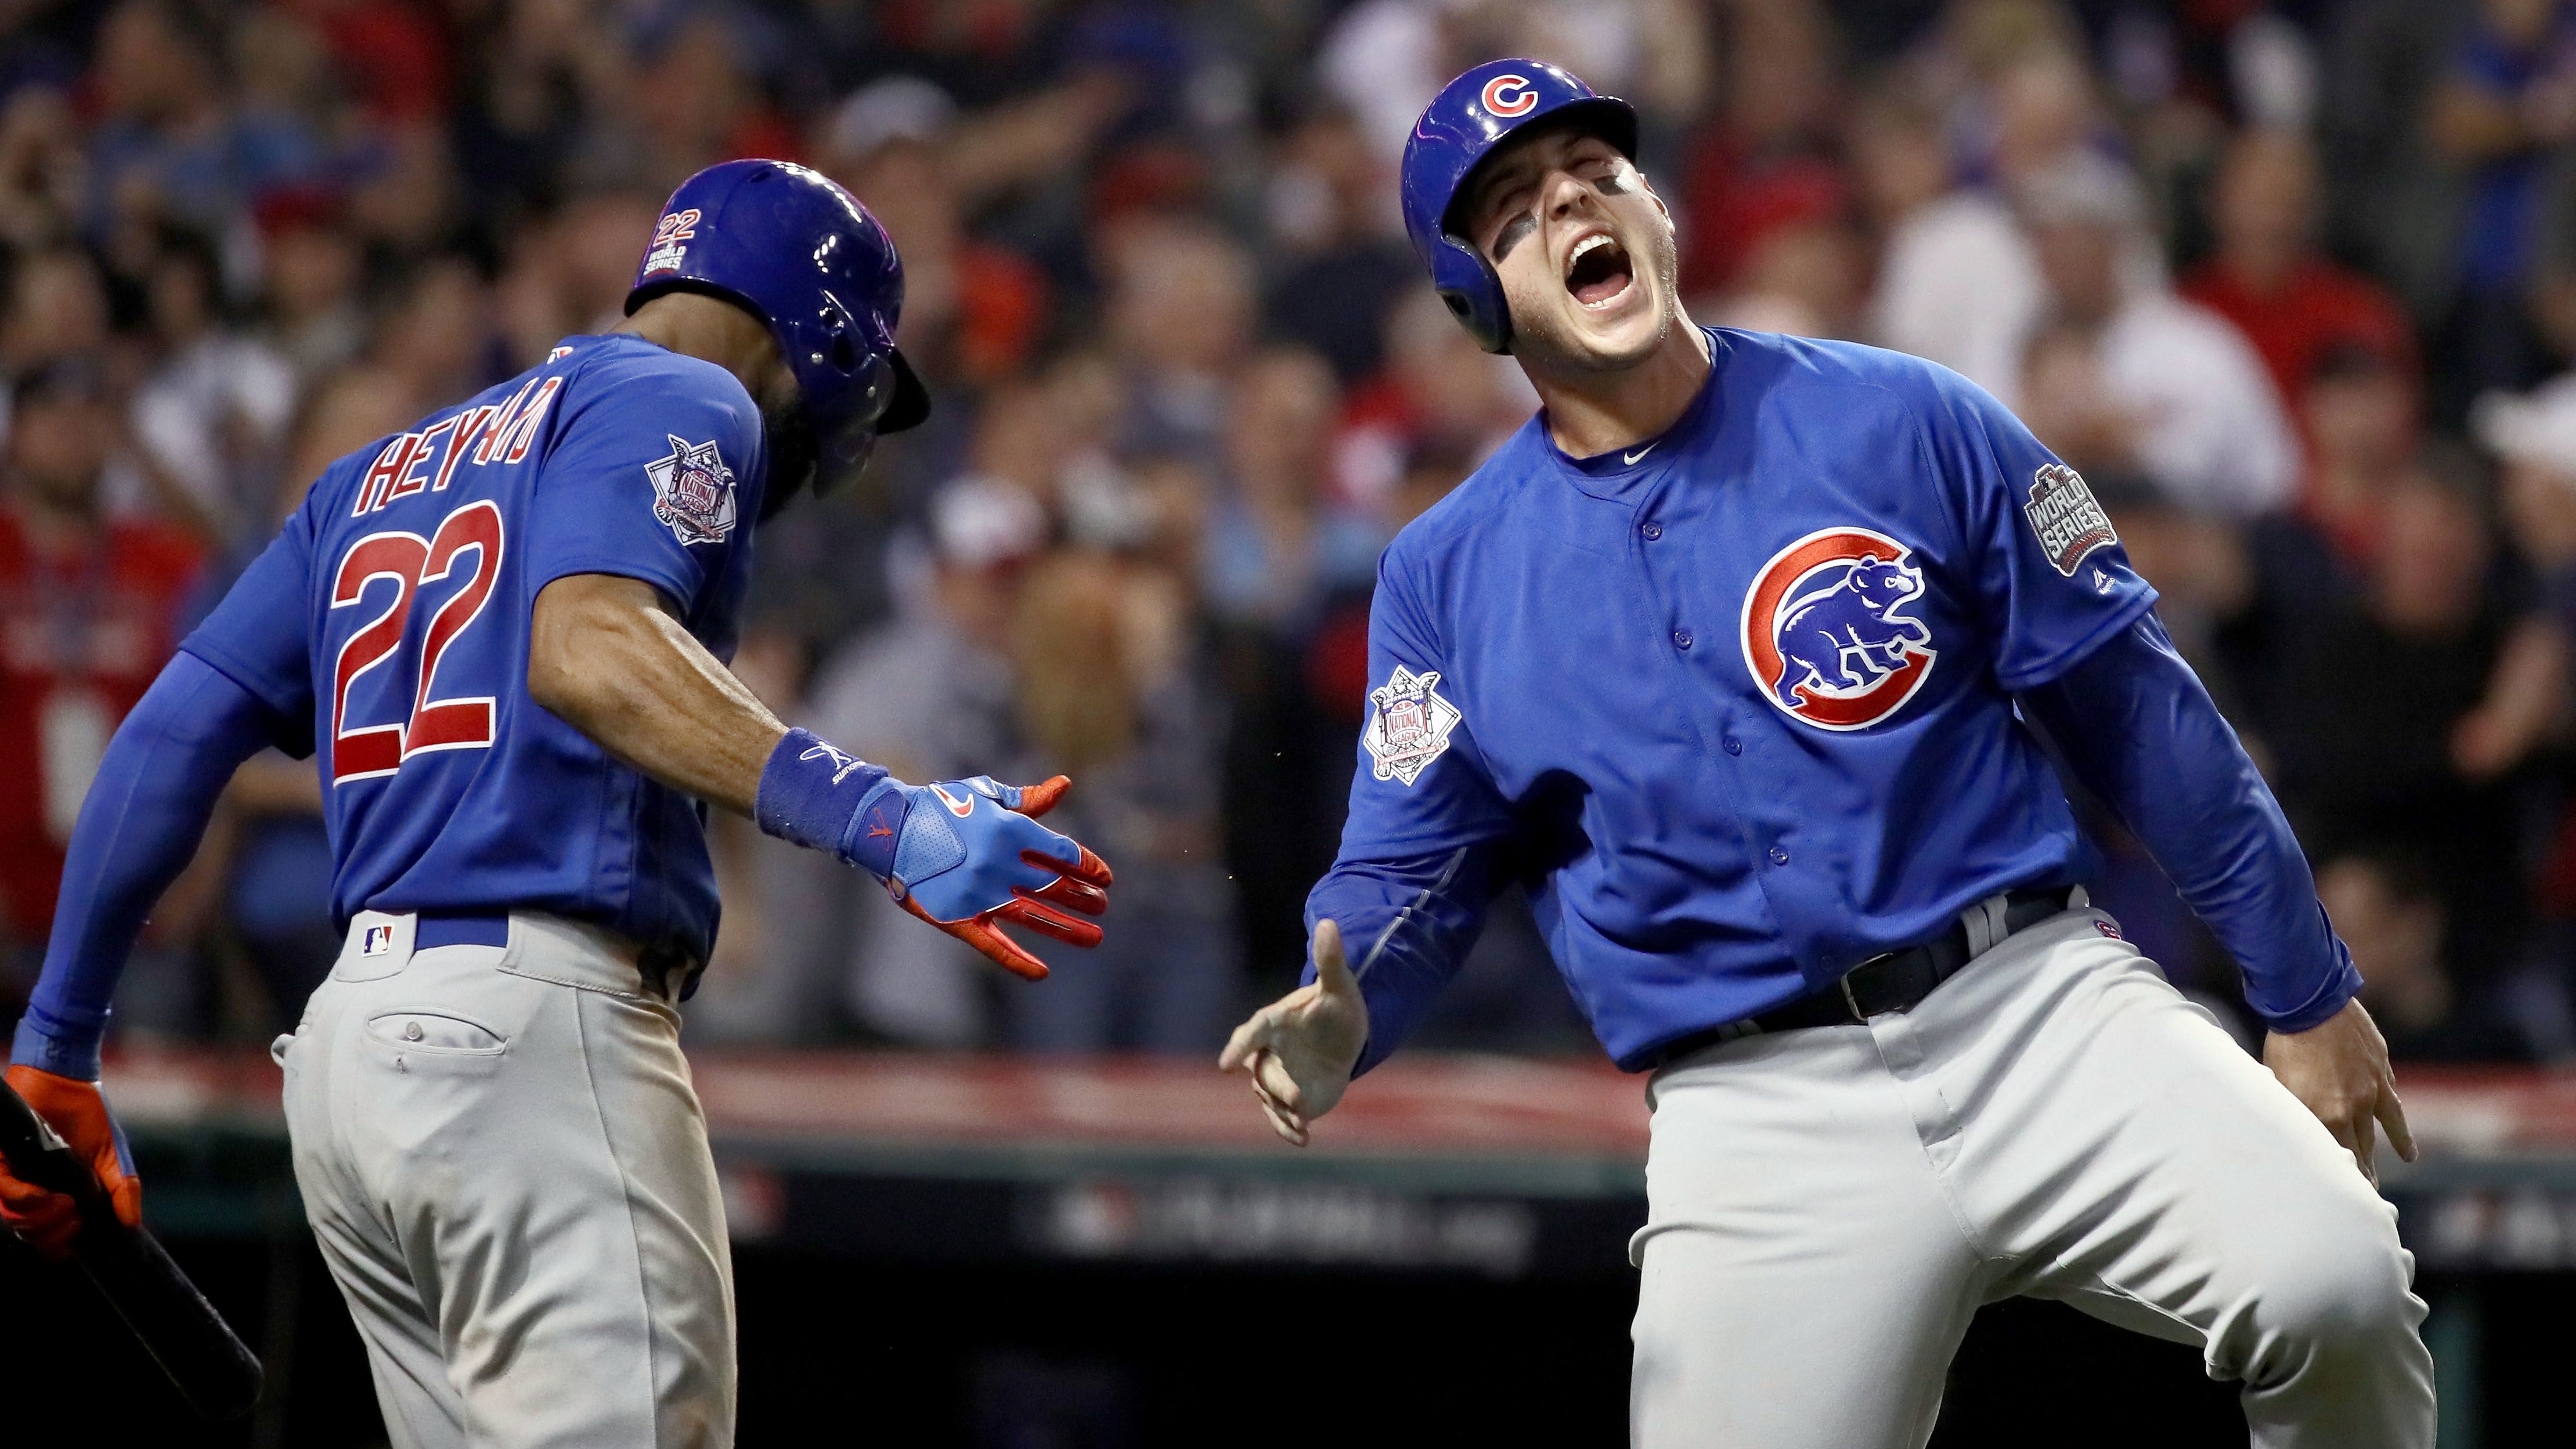 World Series 2016: Cubs-Indians epic Game 7 lives up to historical